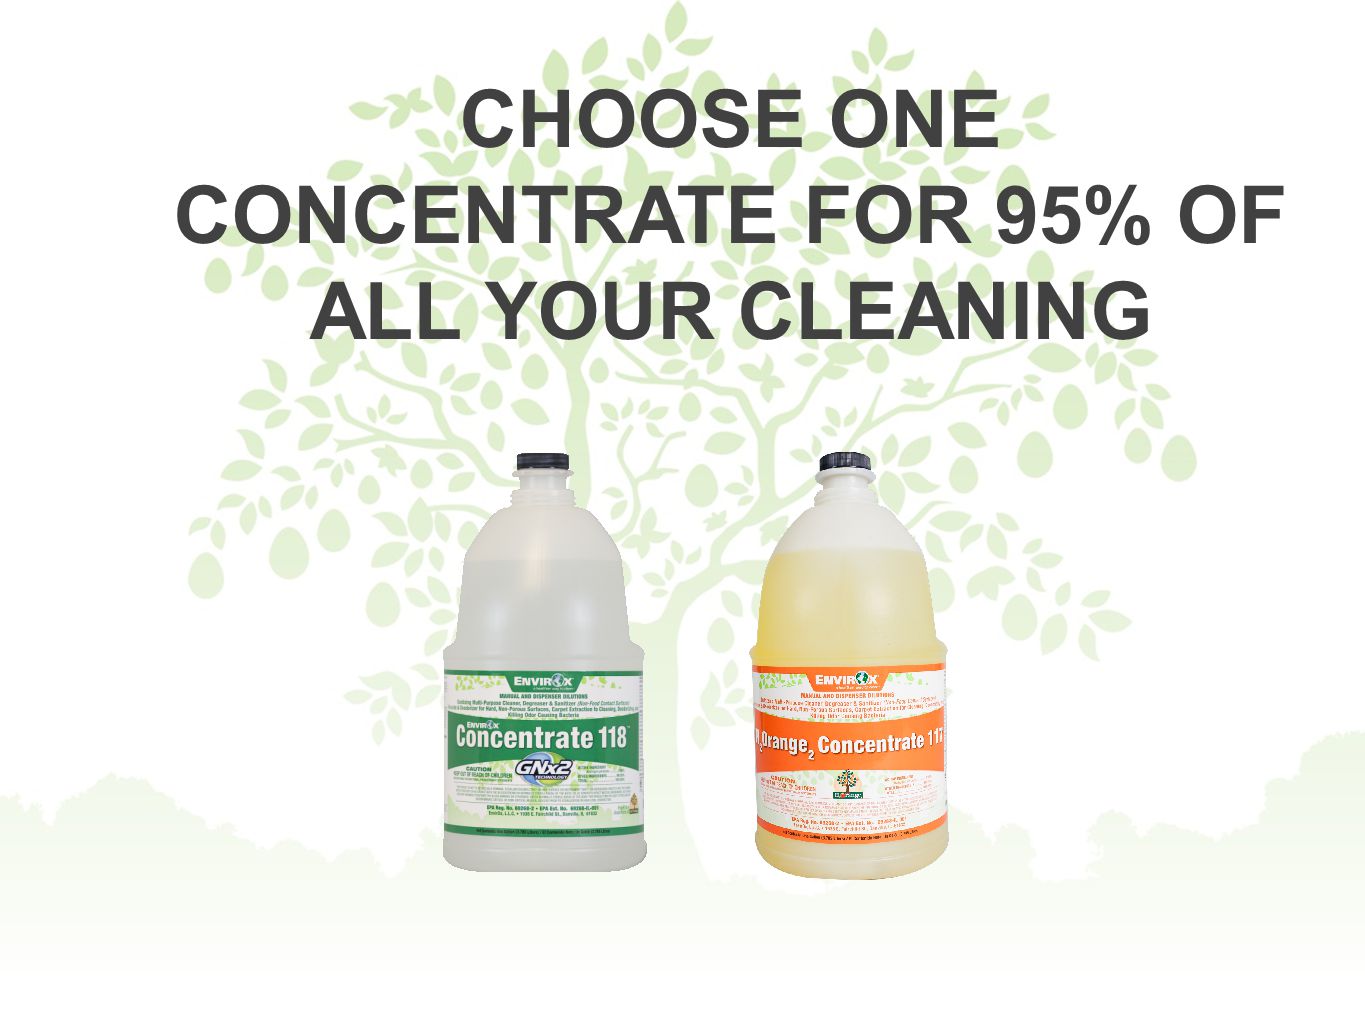 CHOOSE ONE CONCENTRATE FOR 95% OF ALL YOUR CLEANING